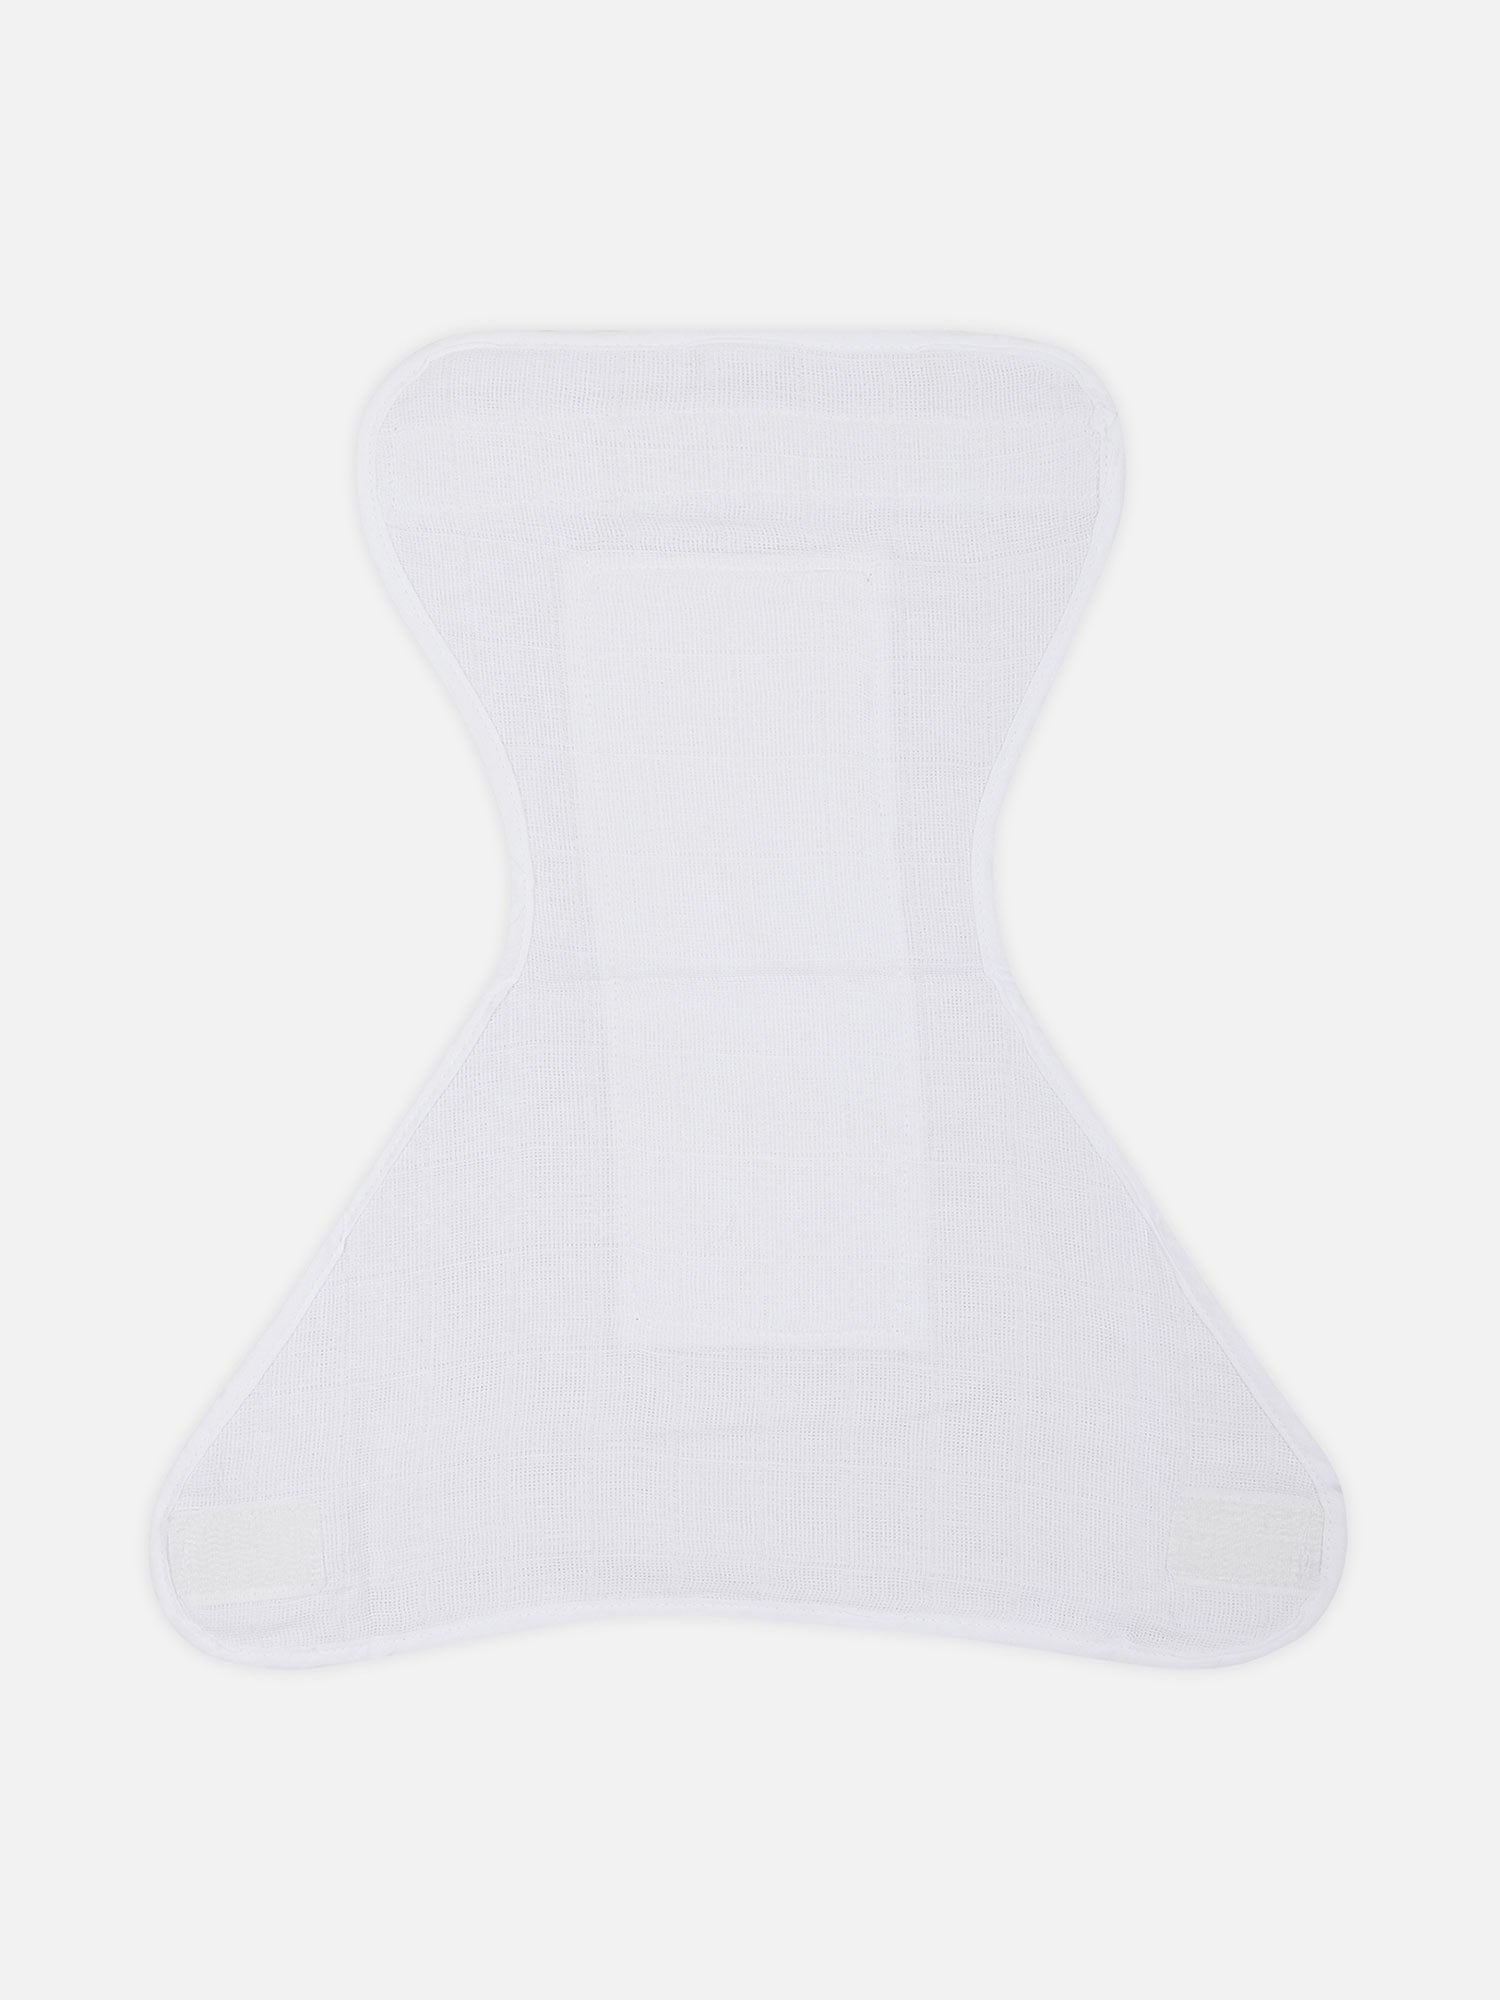 Oh Baby Plain Velcro Nappies White - Ltpl